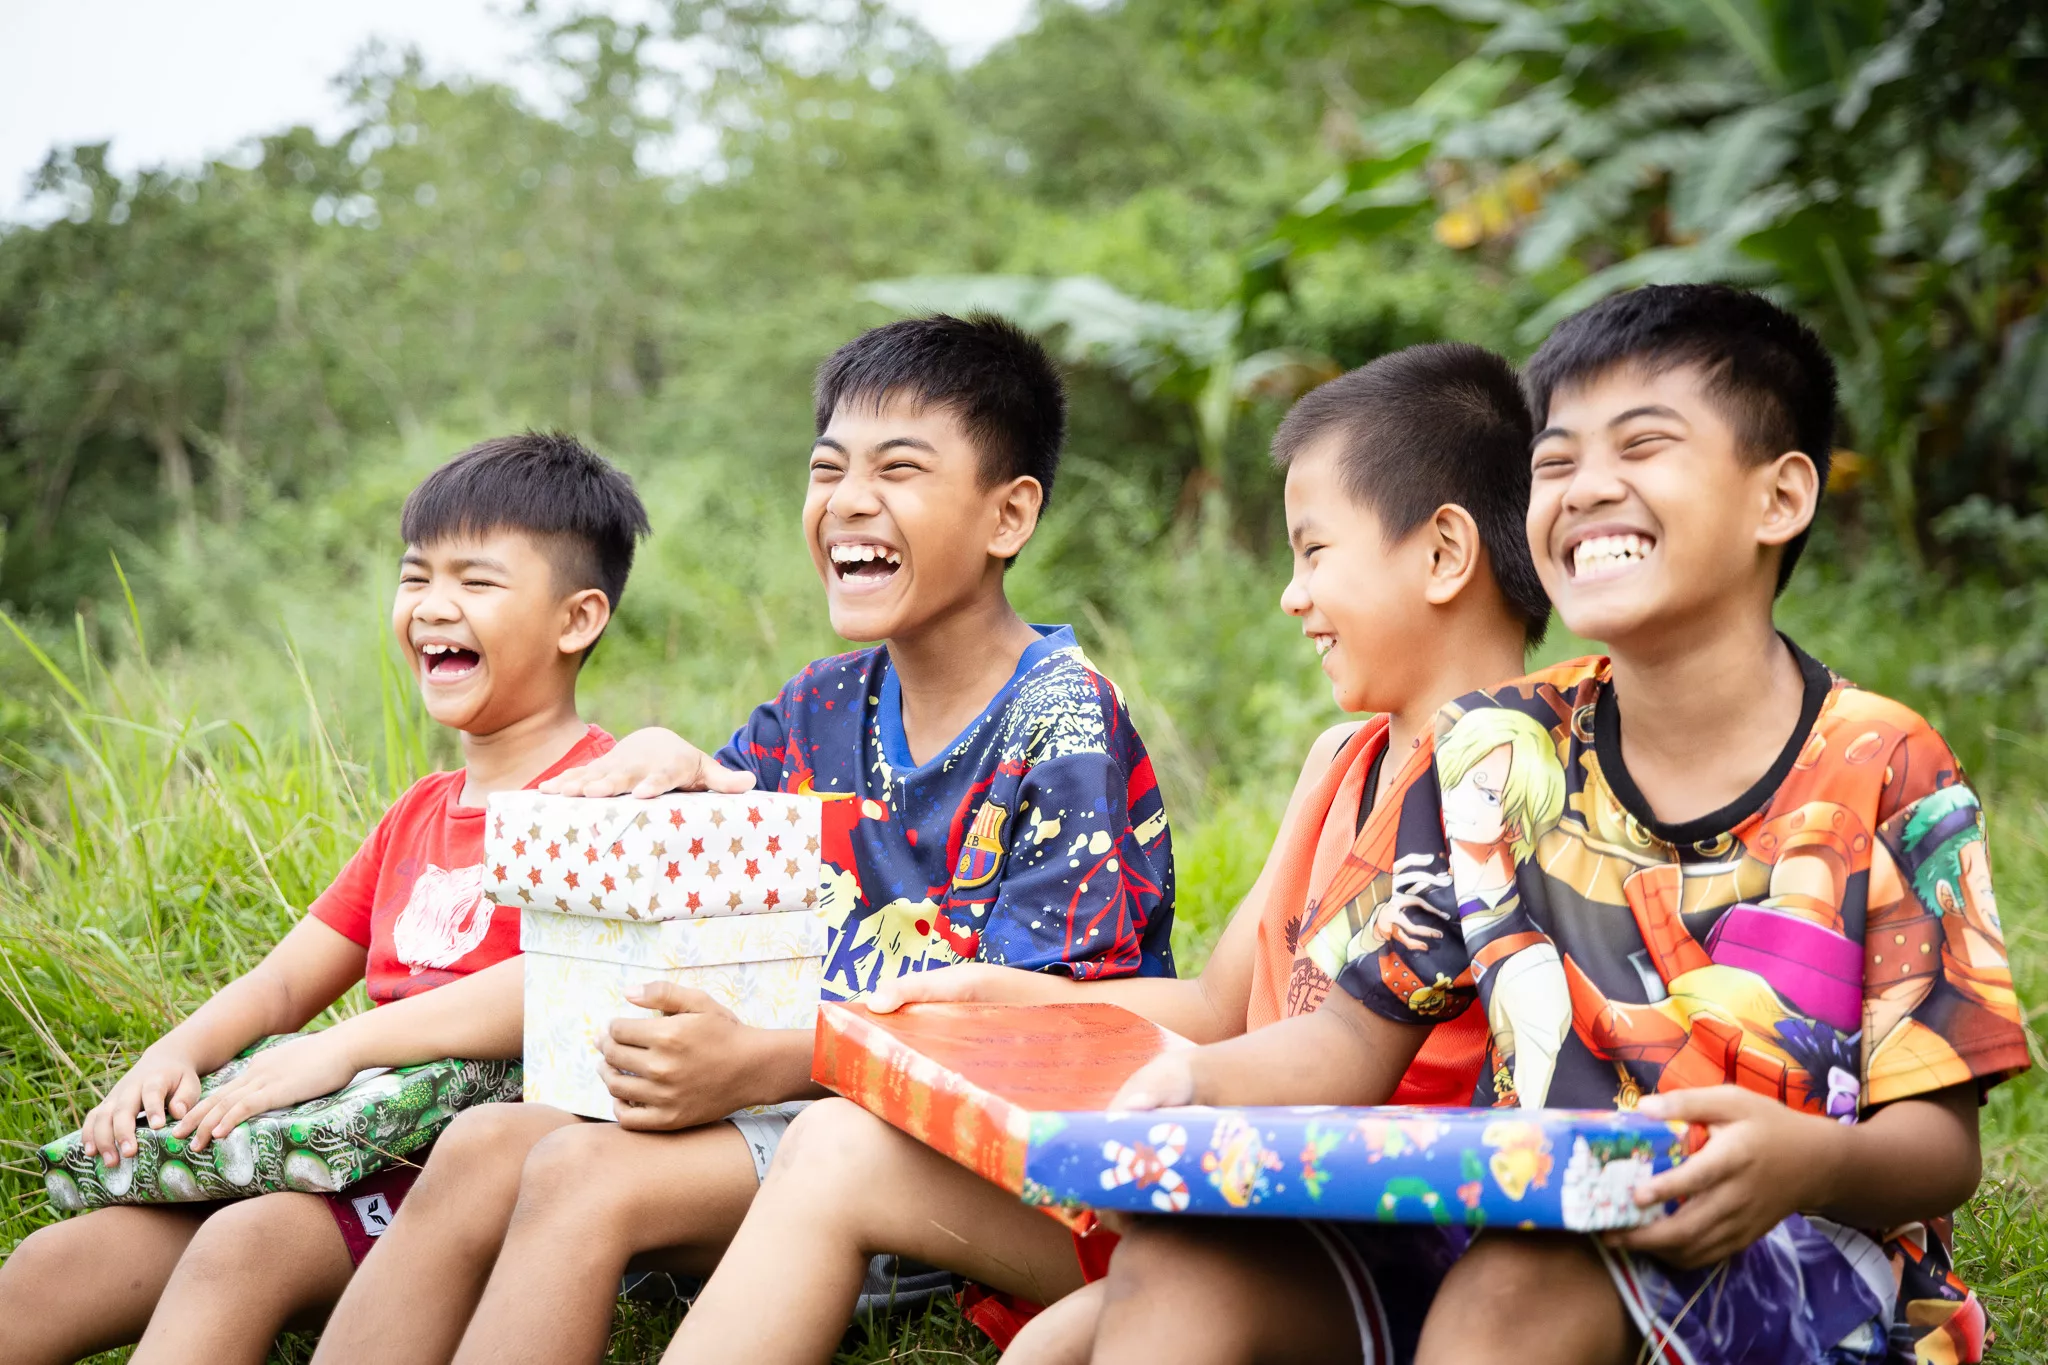 Celebrating Christmas Family Traditions and Acts of Giving with World Vision